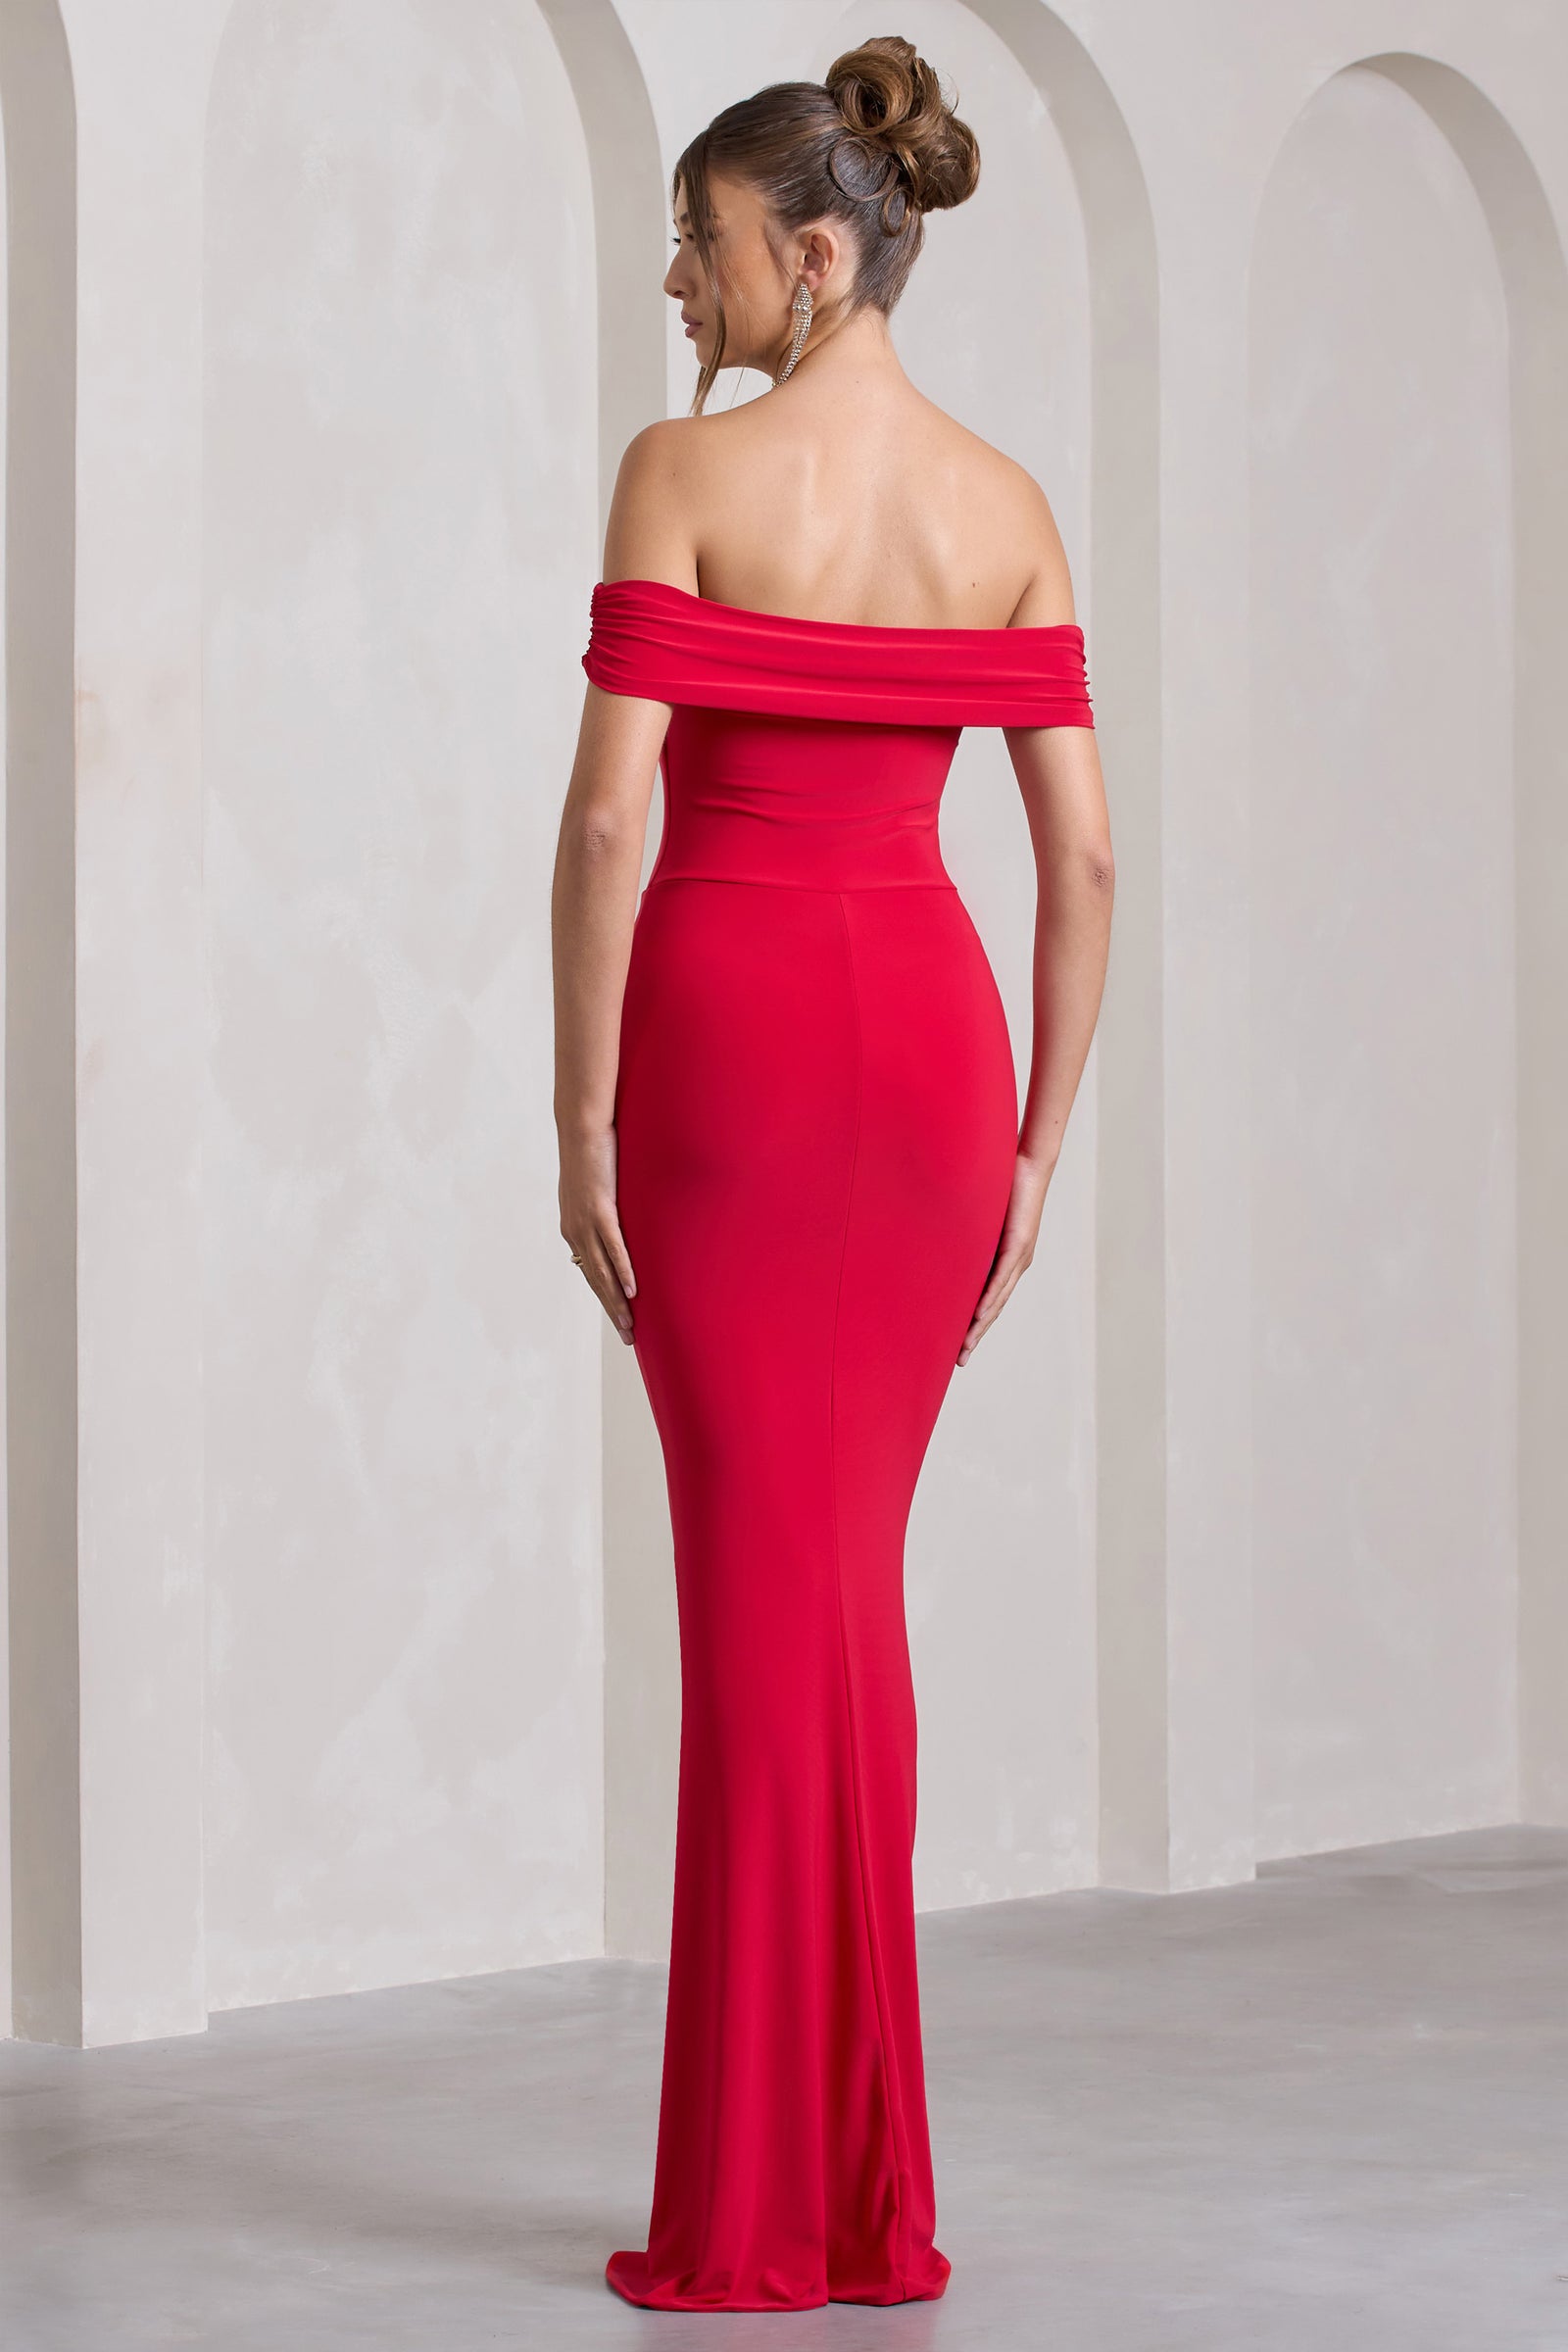 Prom Dresses UK - Evening & Party Dresses | York & Beverley - Stockists in  Yorkshire by Molly Browns